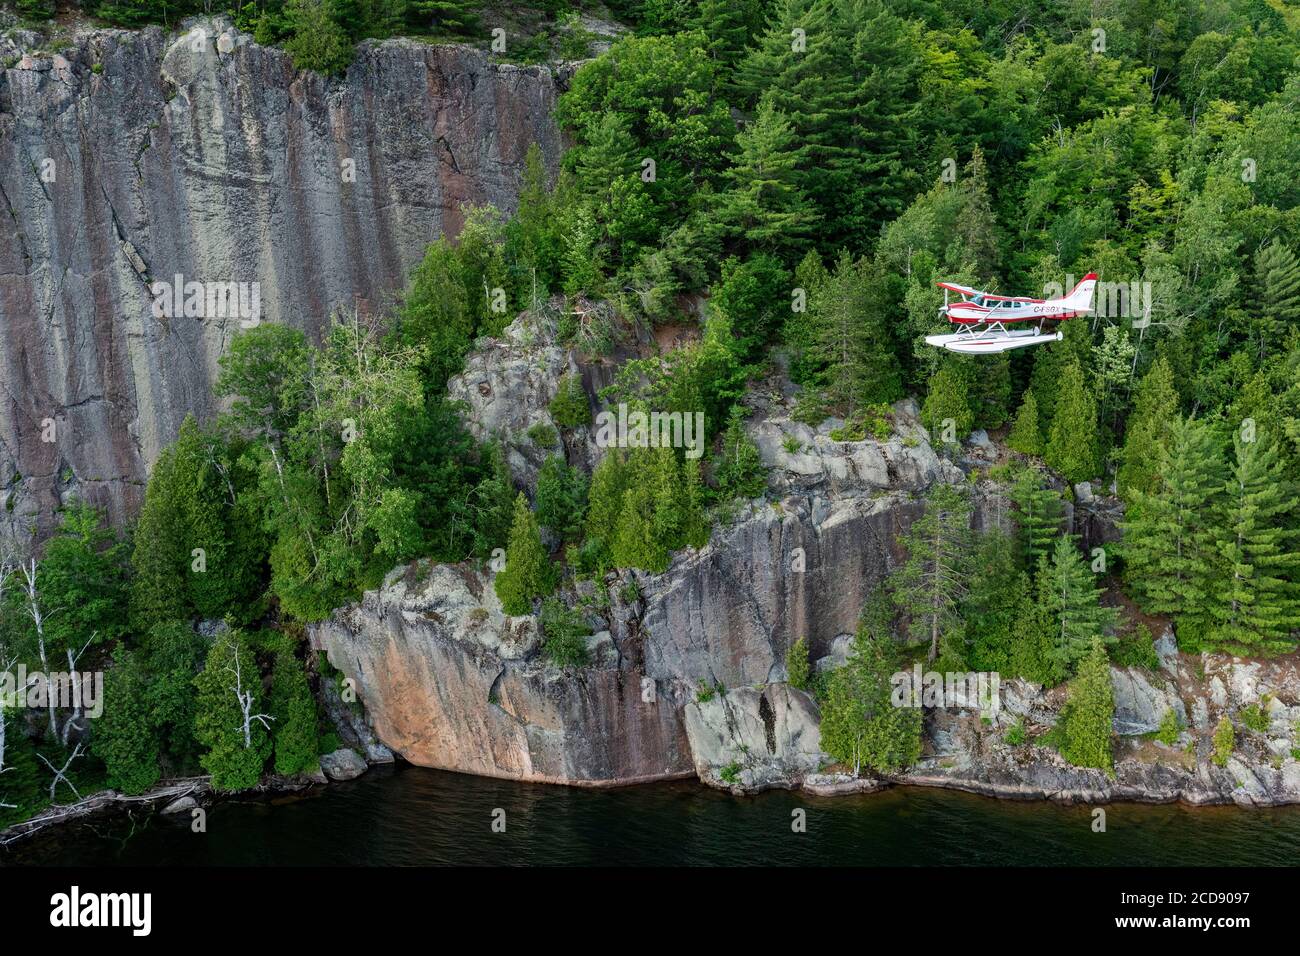 Canada, Province of Quebec, Mauricie Region, Hydravion Aventure, Cessna 206 flight over the boreal forest in the vicinity of Lac Sacacomie Stock Photo